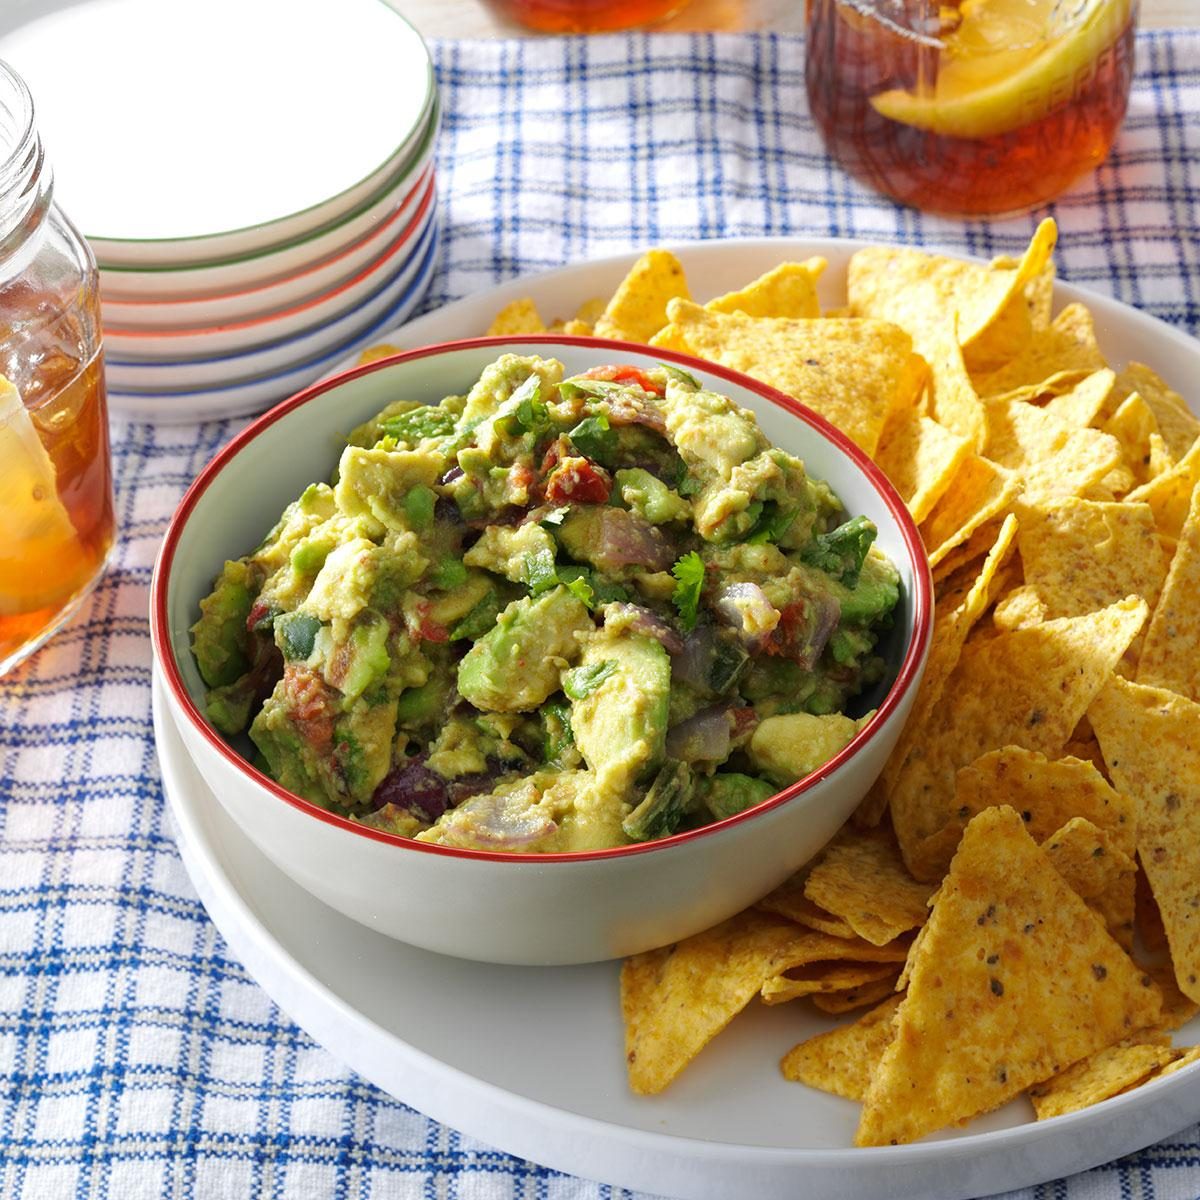 Grilled Guacamole Recipe: How to Make It